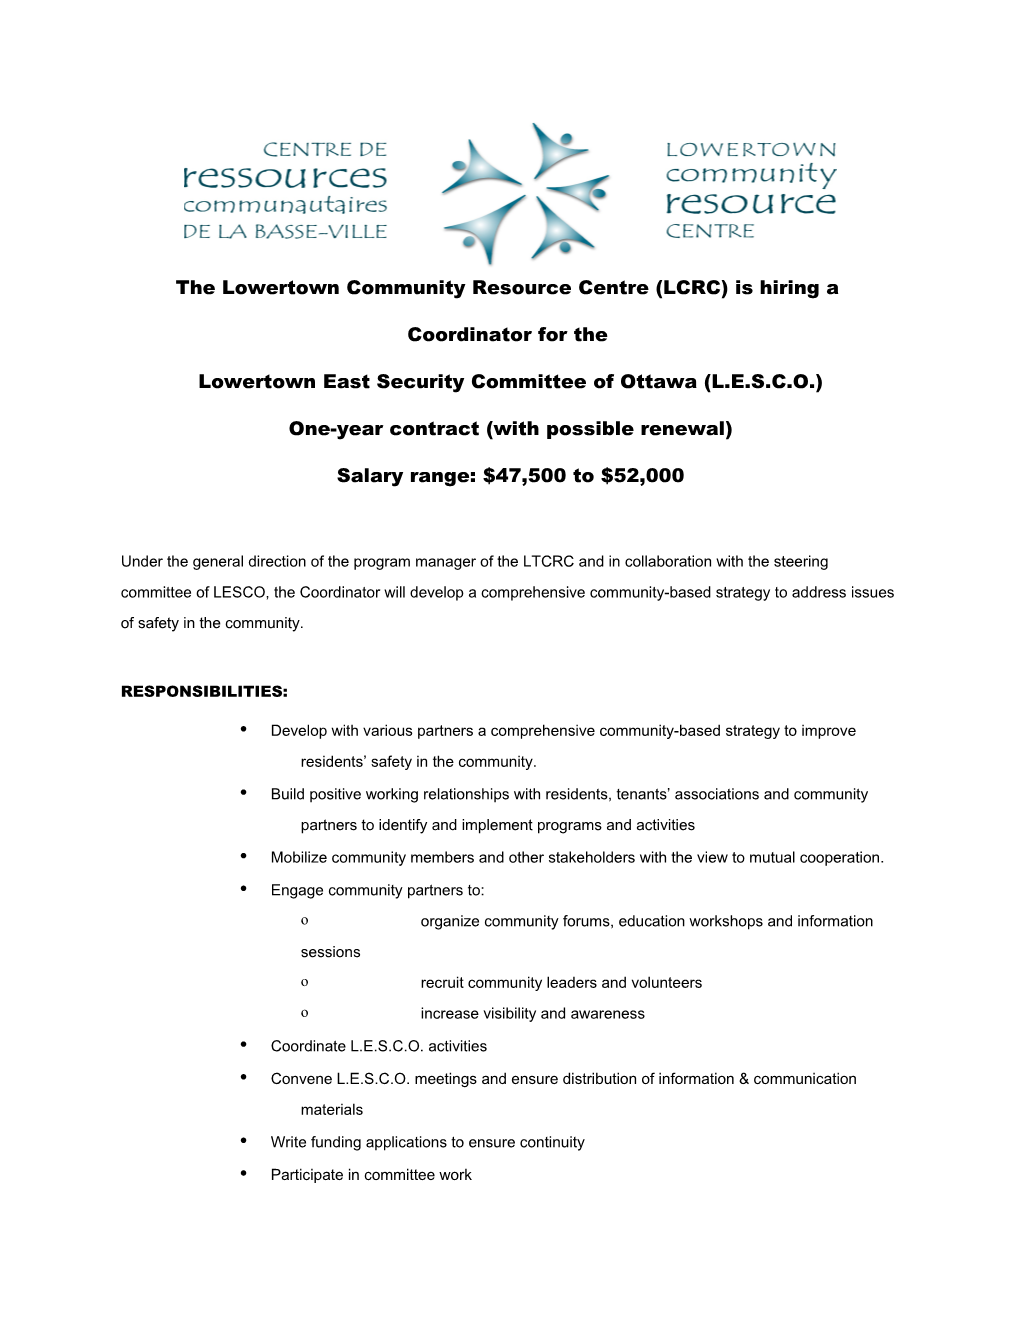 The Lowertown Community Resource Centre (LCRC) Is Hiring A